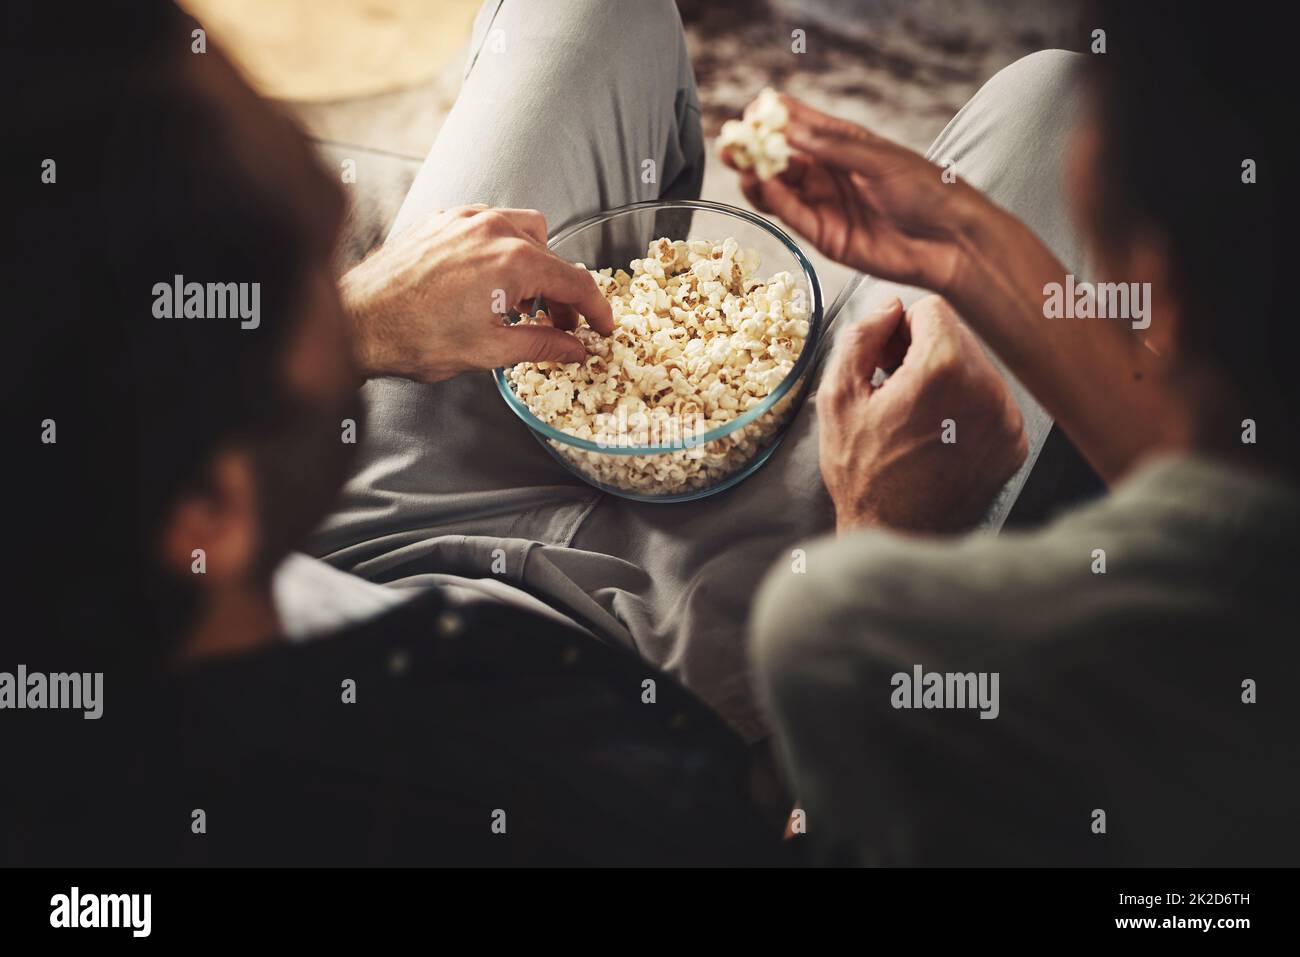 Gotta be love if Im sharing popcorn. Rearview shot of a young couple sitting on sofa snacking on popcorn together at home. Stock Photo